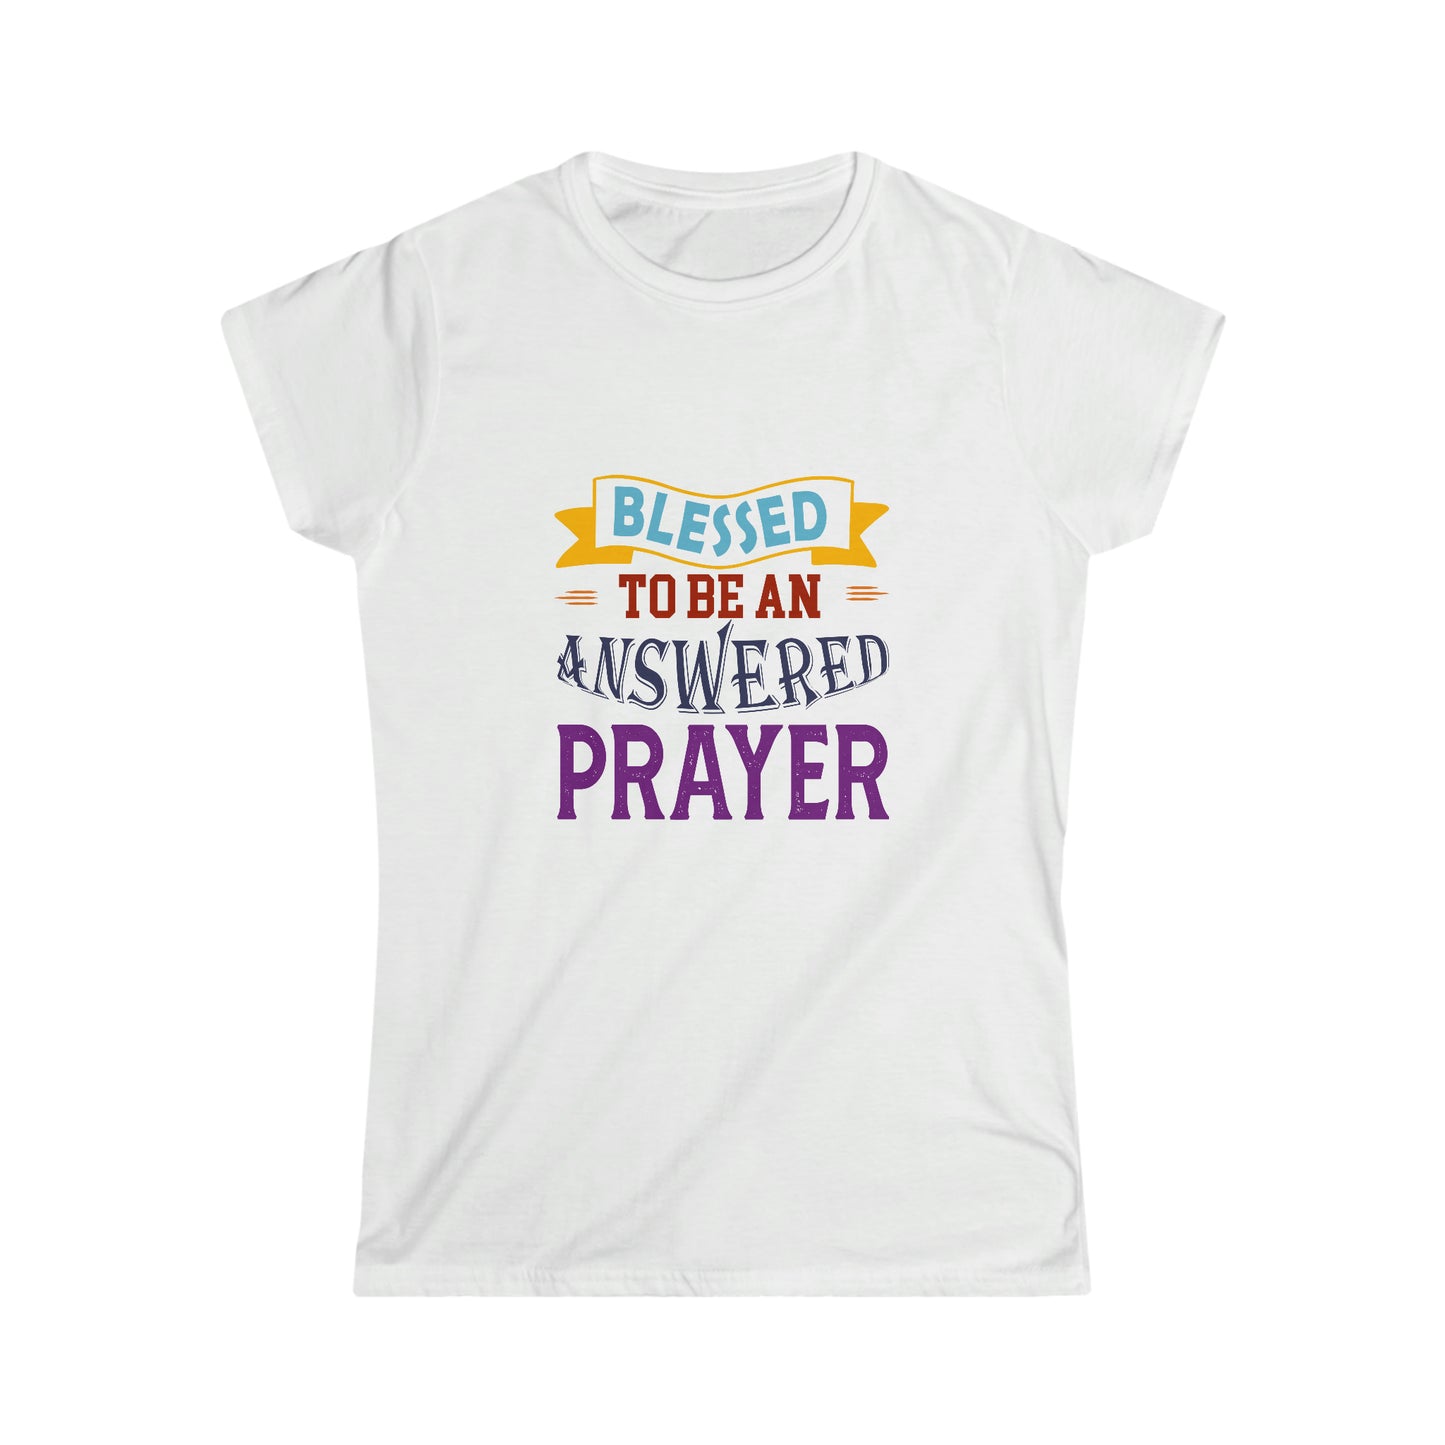 Blessed To Be An Answered Prayer Women's T-shirt